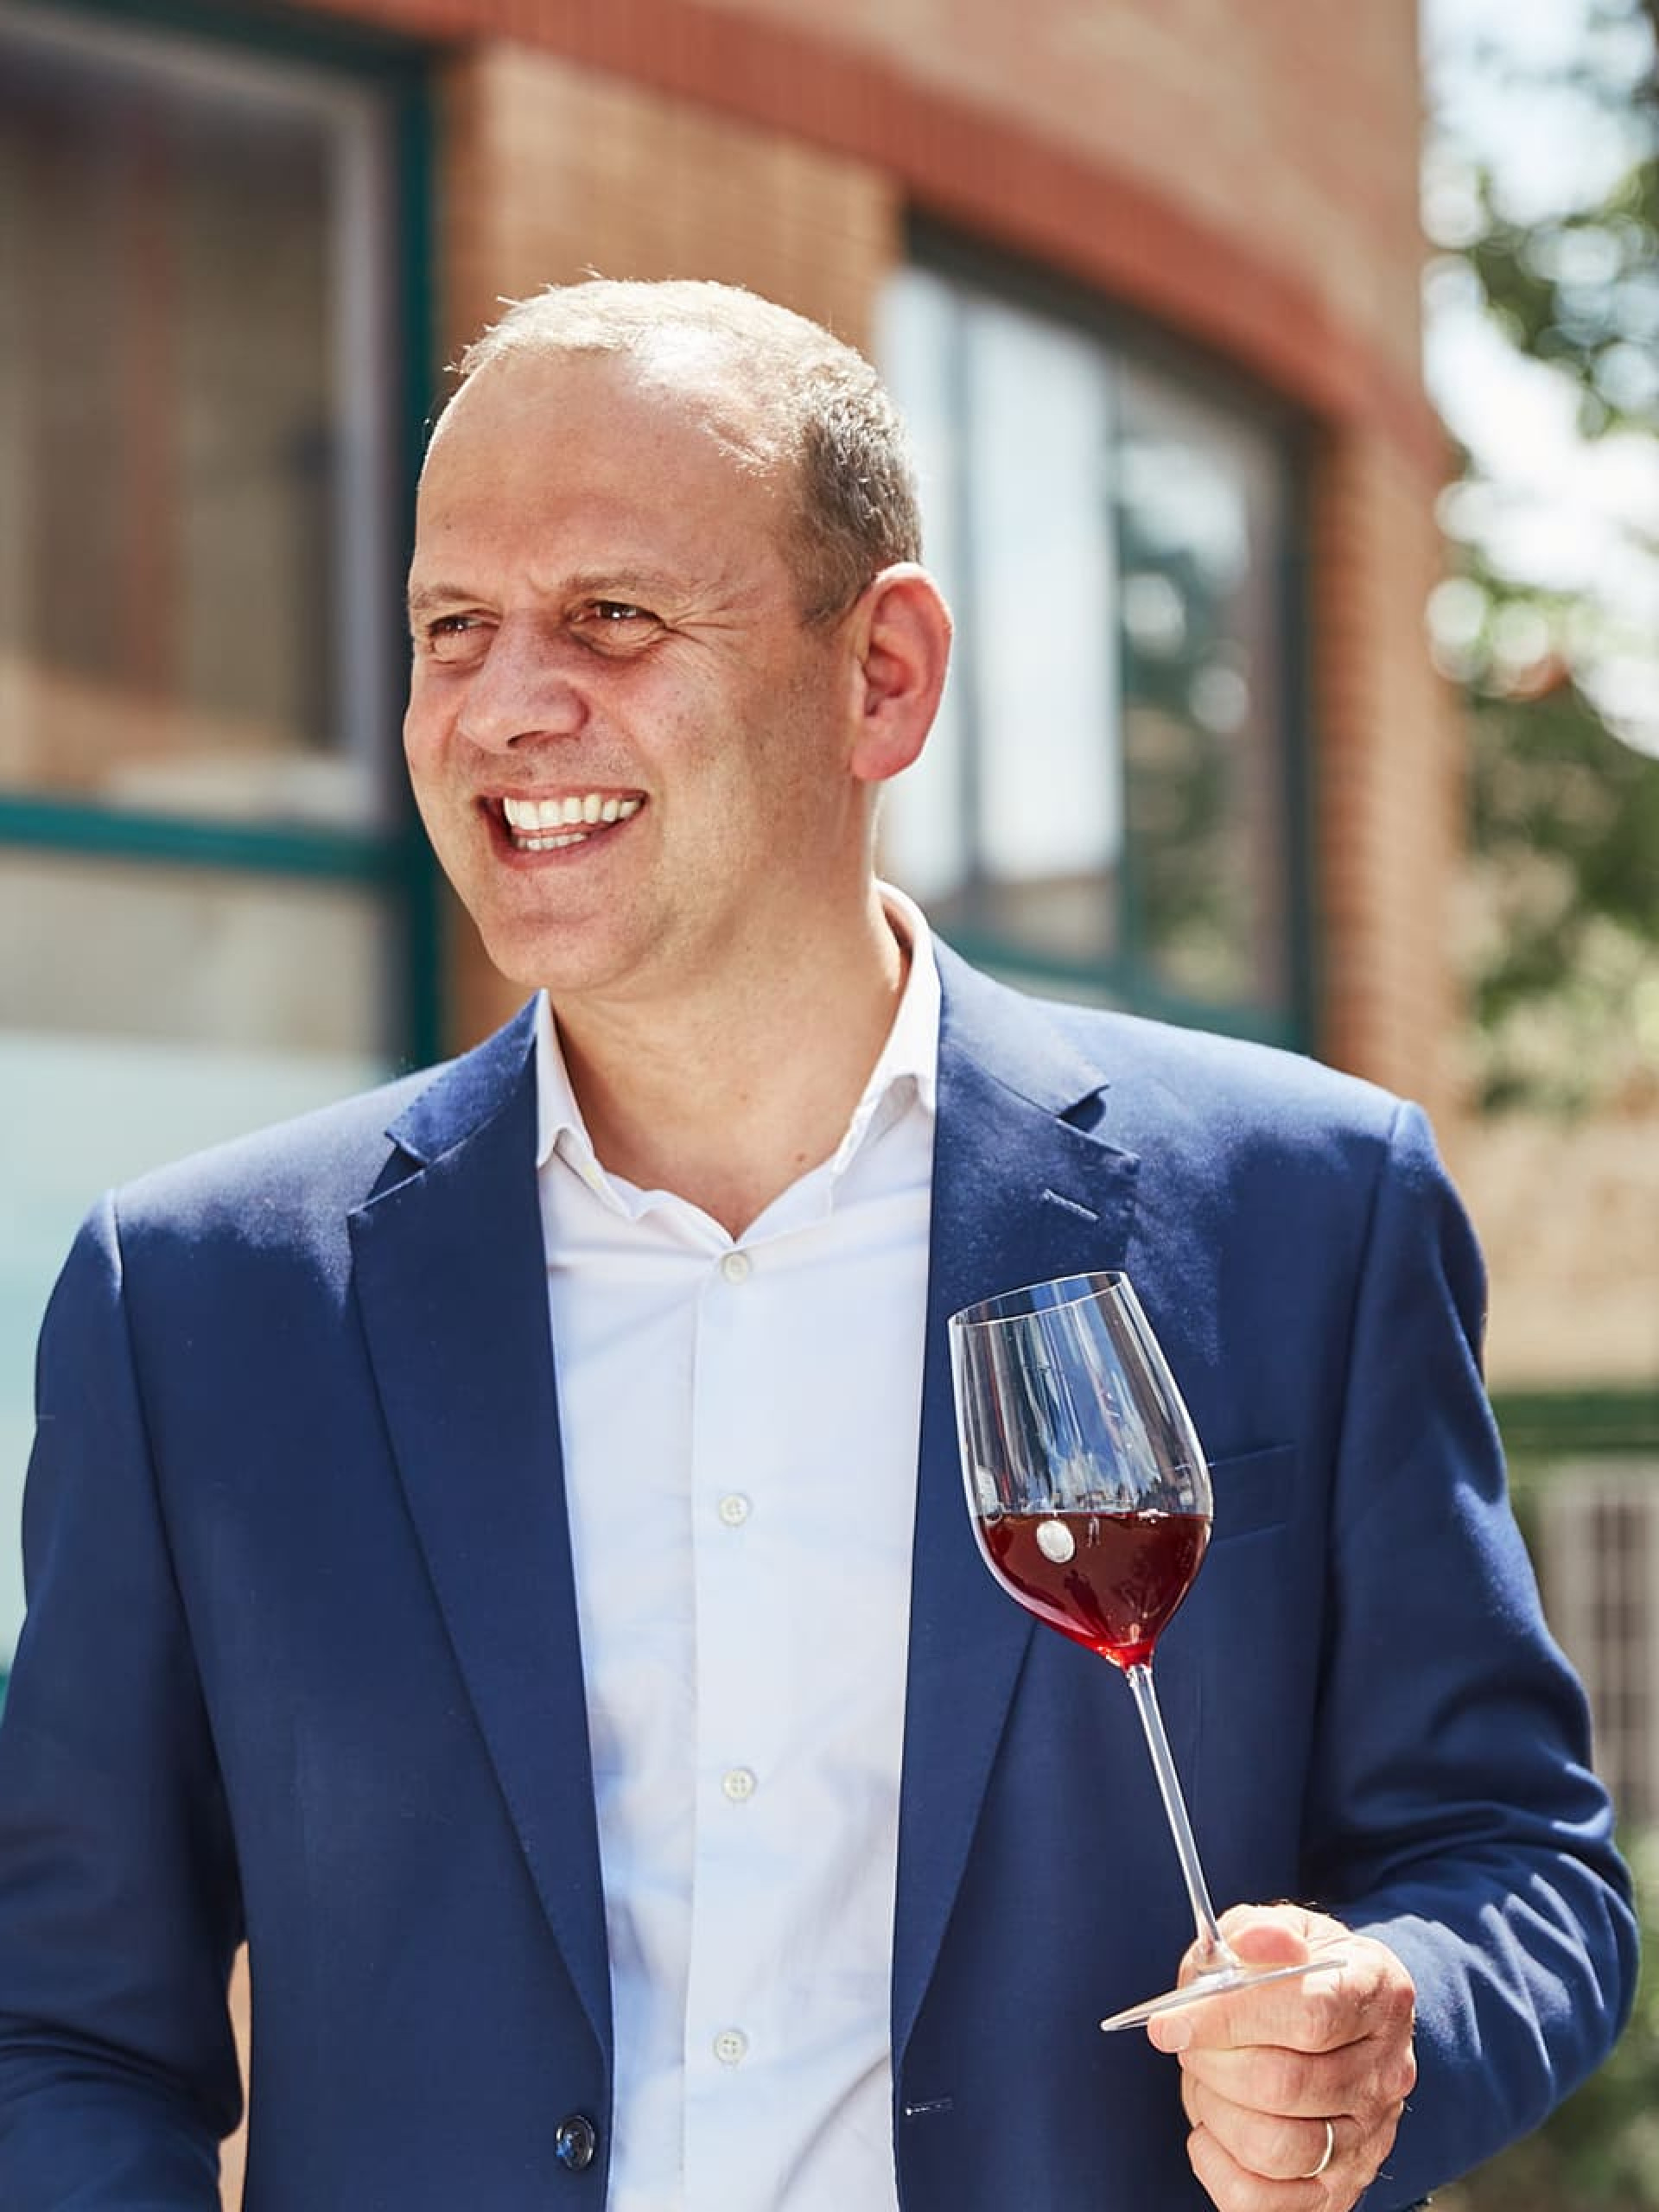 Talk with Cyrille Jomand - IDealwine’s CEO - The wine auction market - France